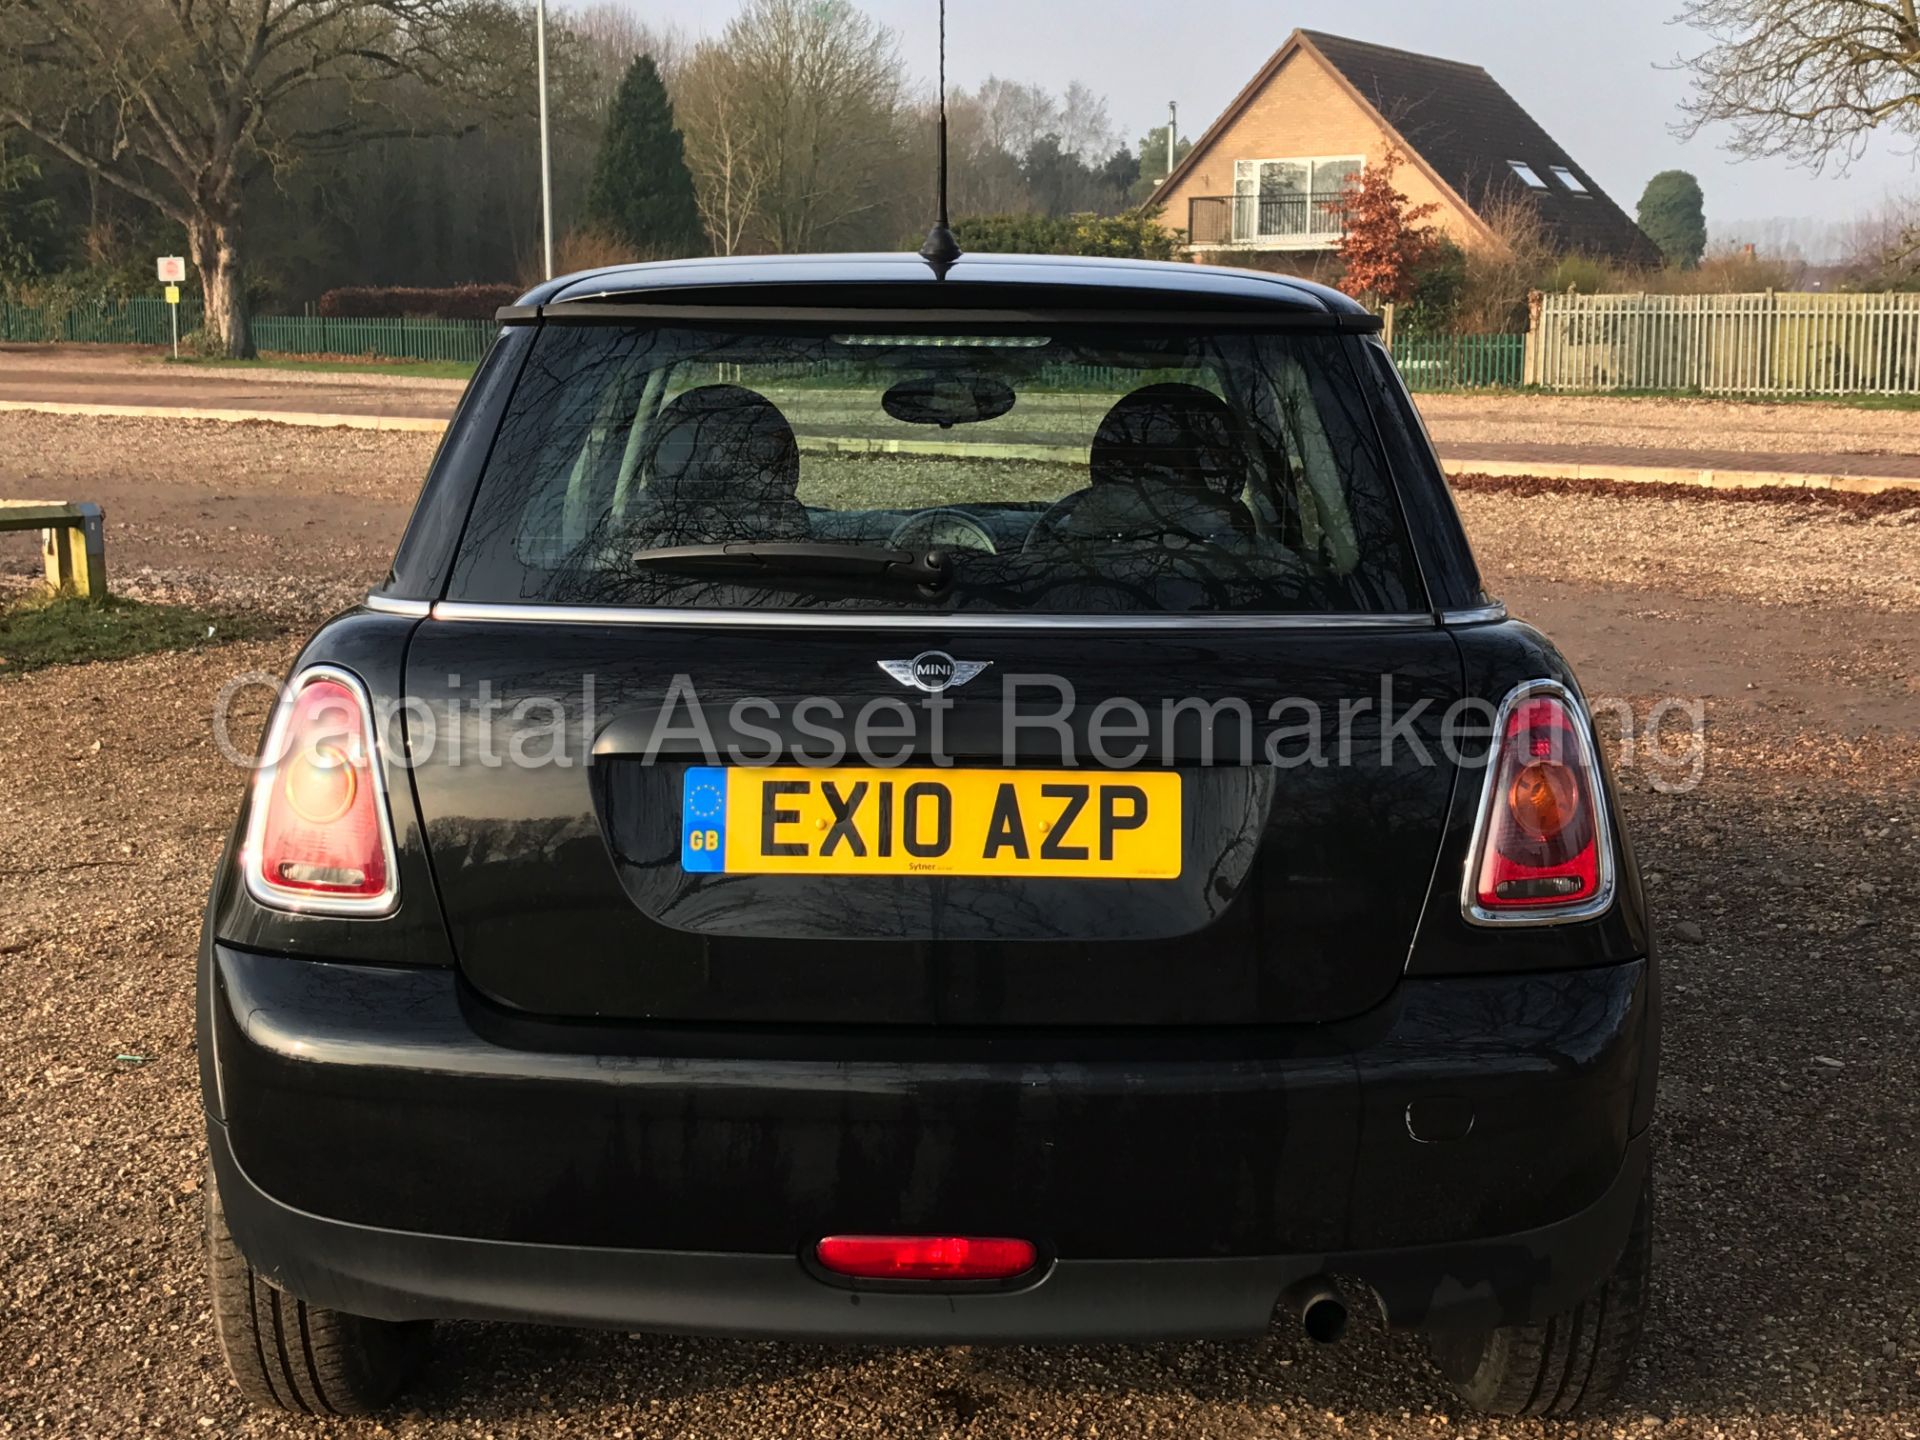 MINI 'FIRST EDITION' (2010) '3 DOOR HATCHBACK' *1 OWNER - FULL HISTORY - LOW MILES* (60MPG+) - Image 4 of 22